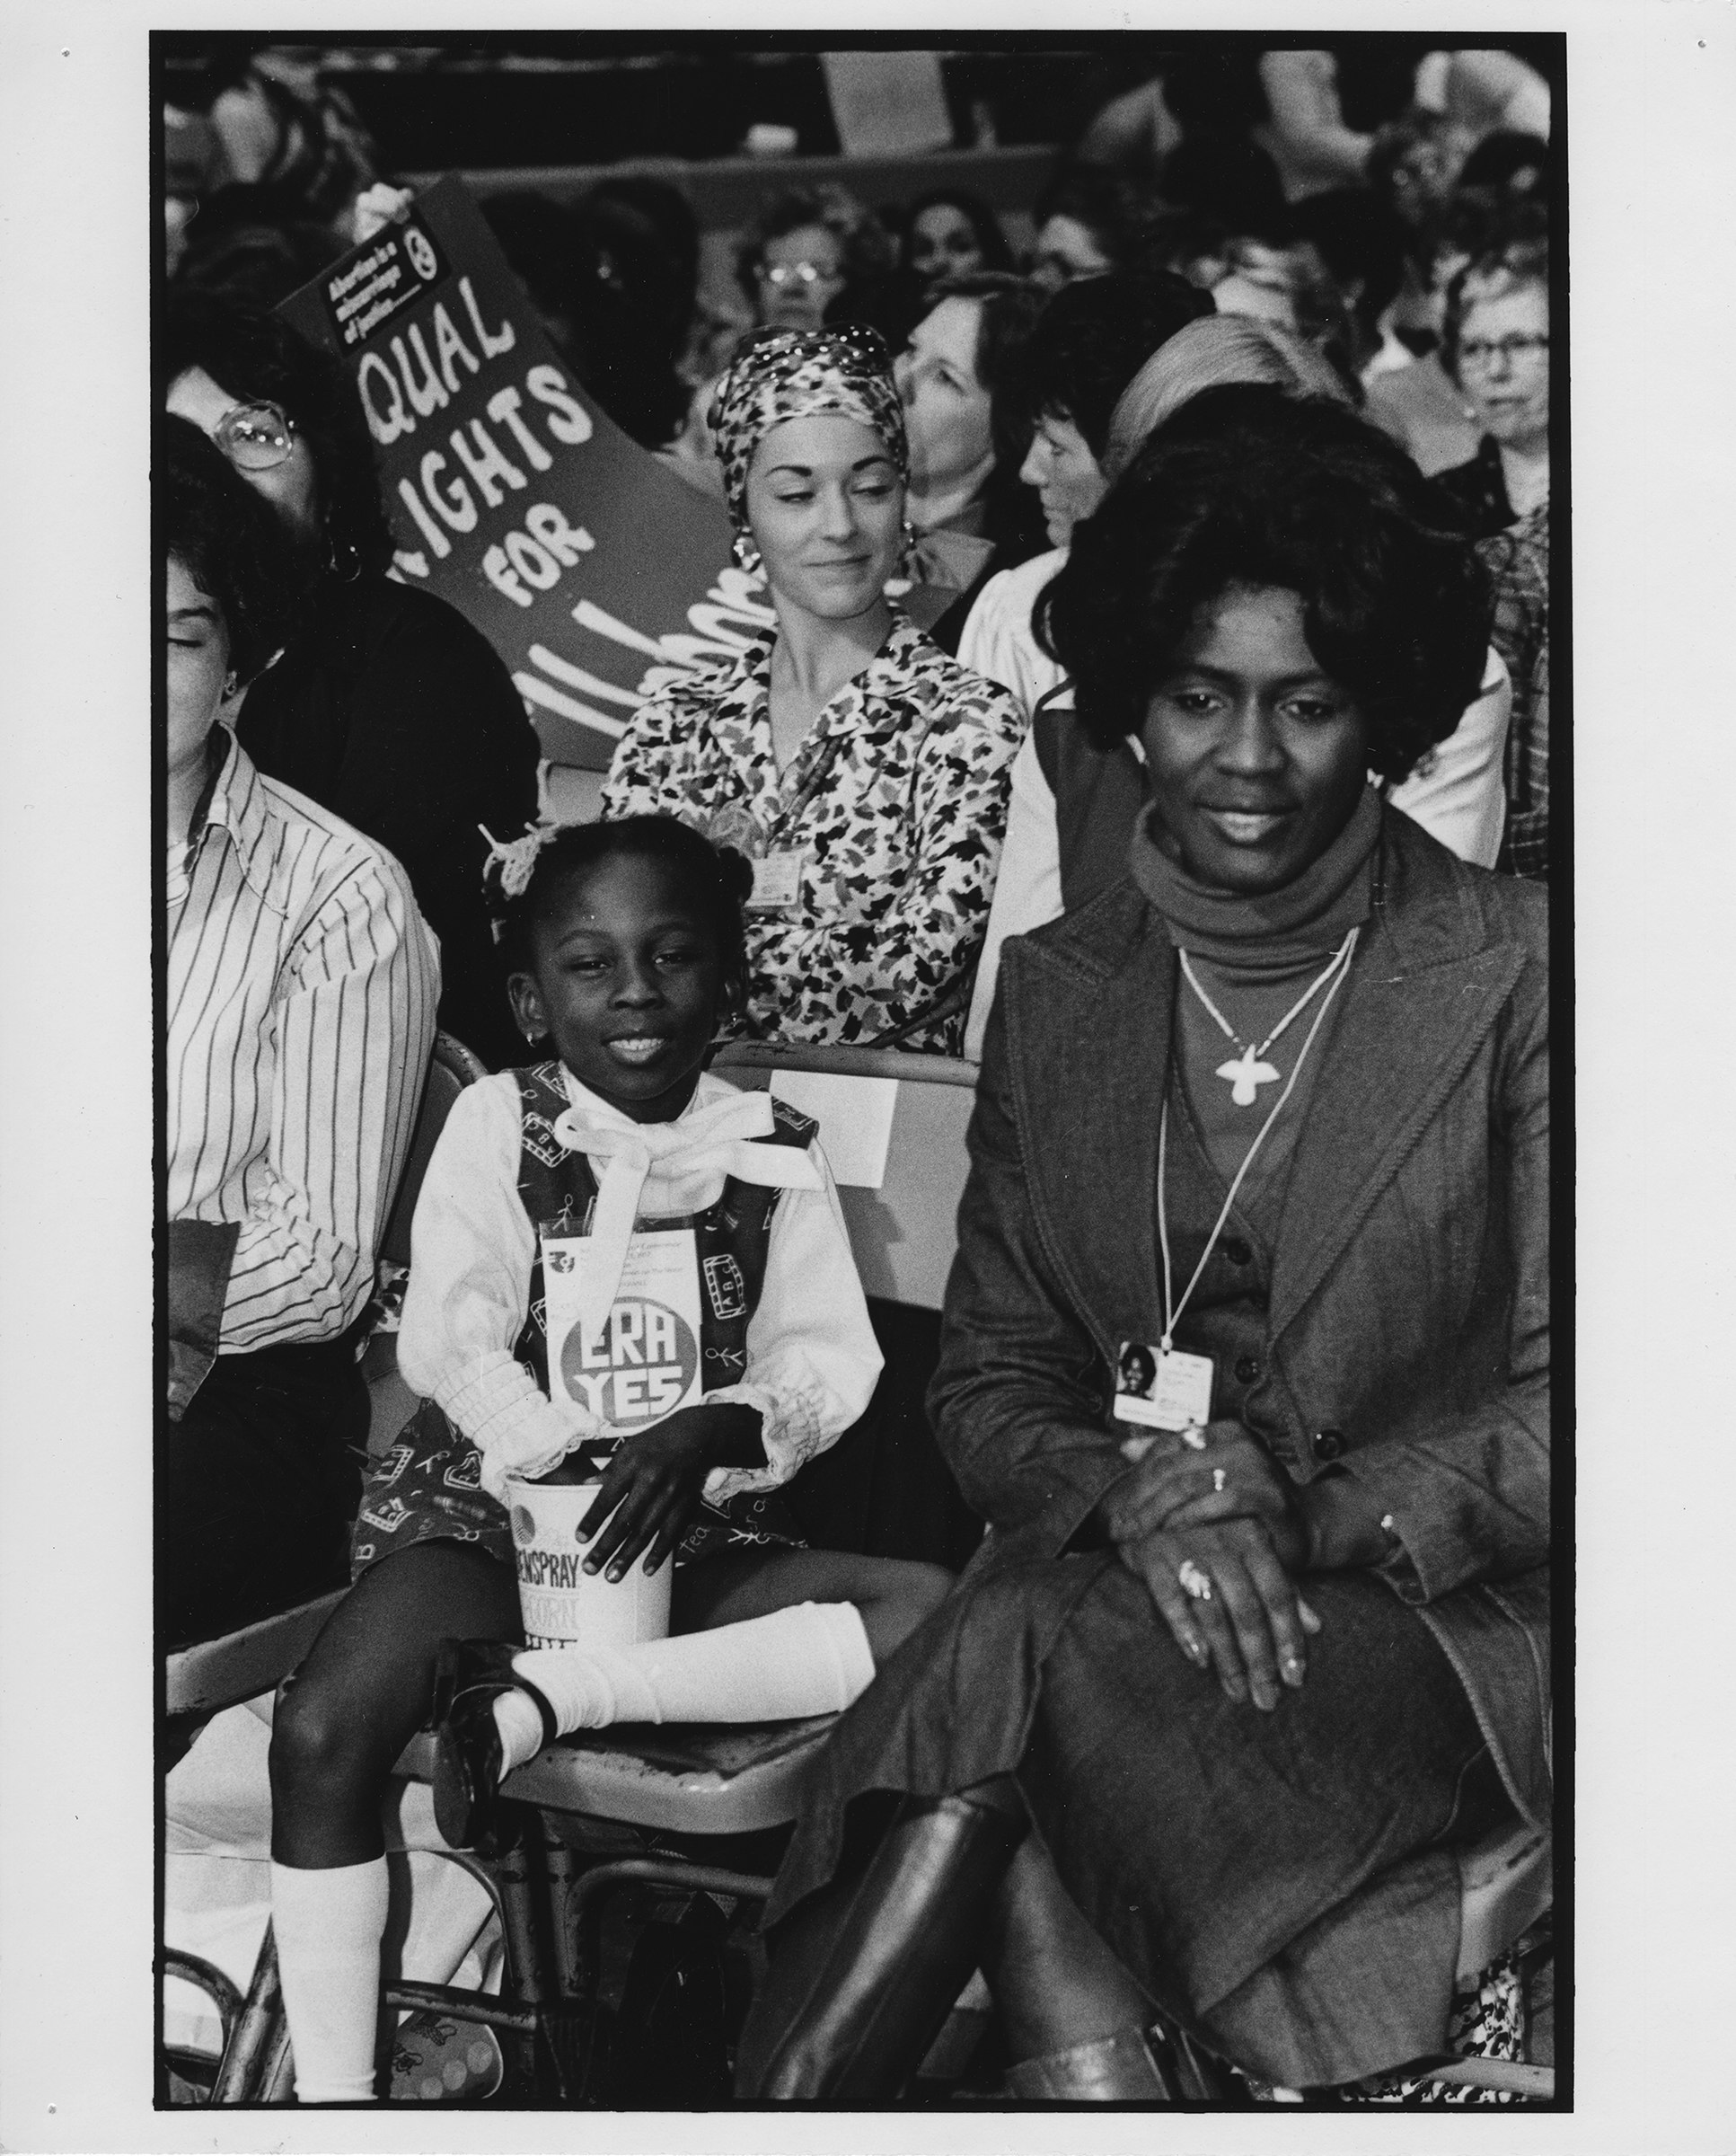 Black and white photograph of a Black woman and her daughter, both smiling, sitting among a conference hall crowd of women.